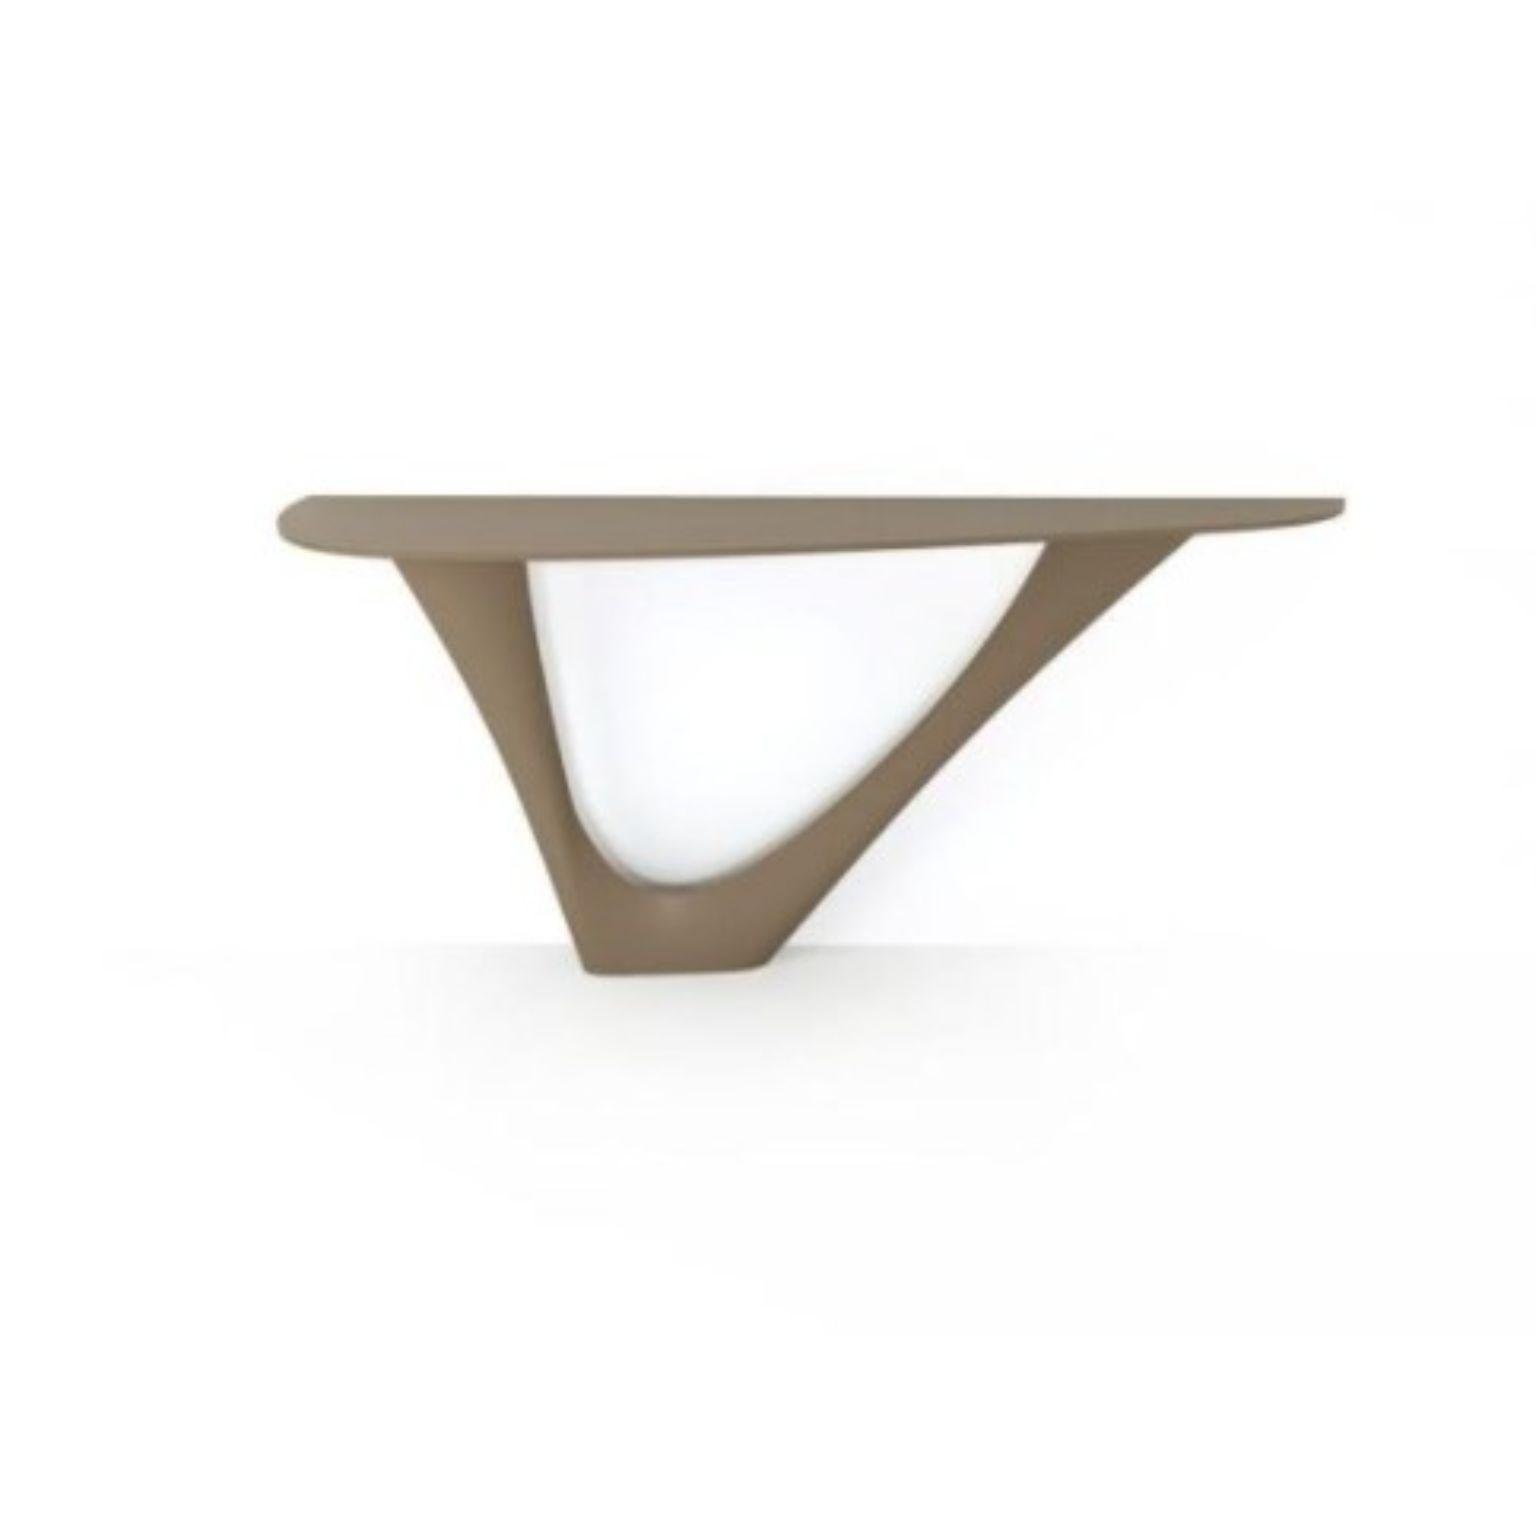 Beige Grey G-Console Steel Base with Steel Top Mono by Zieta
Dimensions: D 43 x W 159 x H 75 cm 
Material: Carbon steel.
Also available in different colors and different dimensions. Please contact us.

G-Console is another bionic object in our